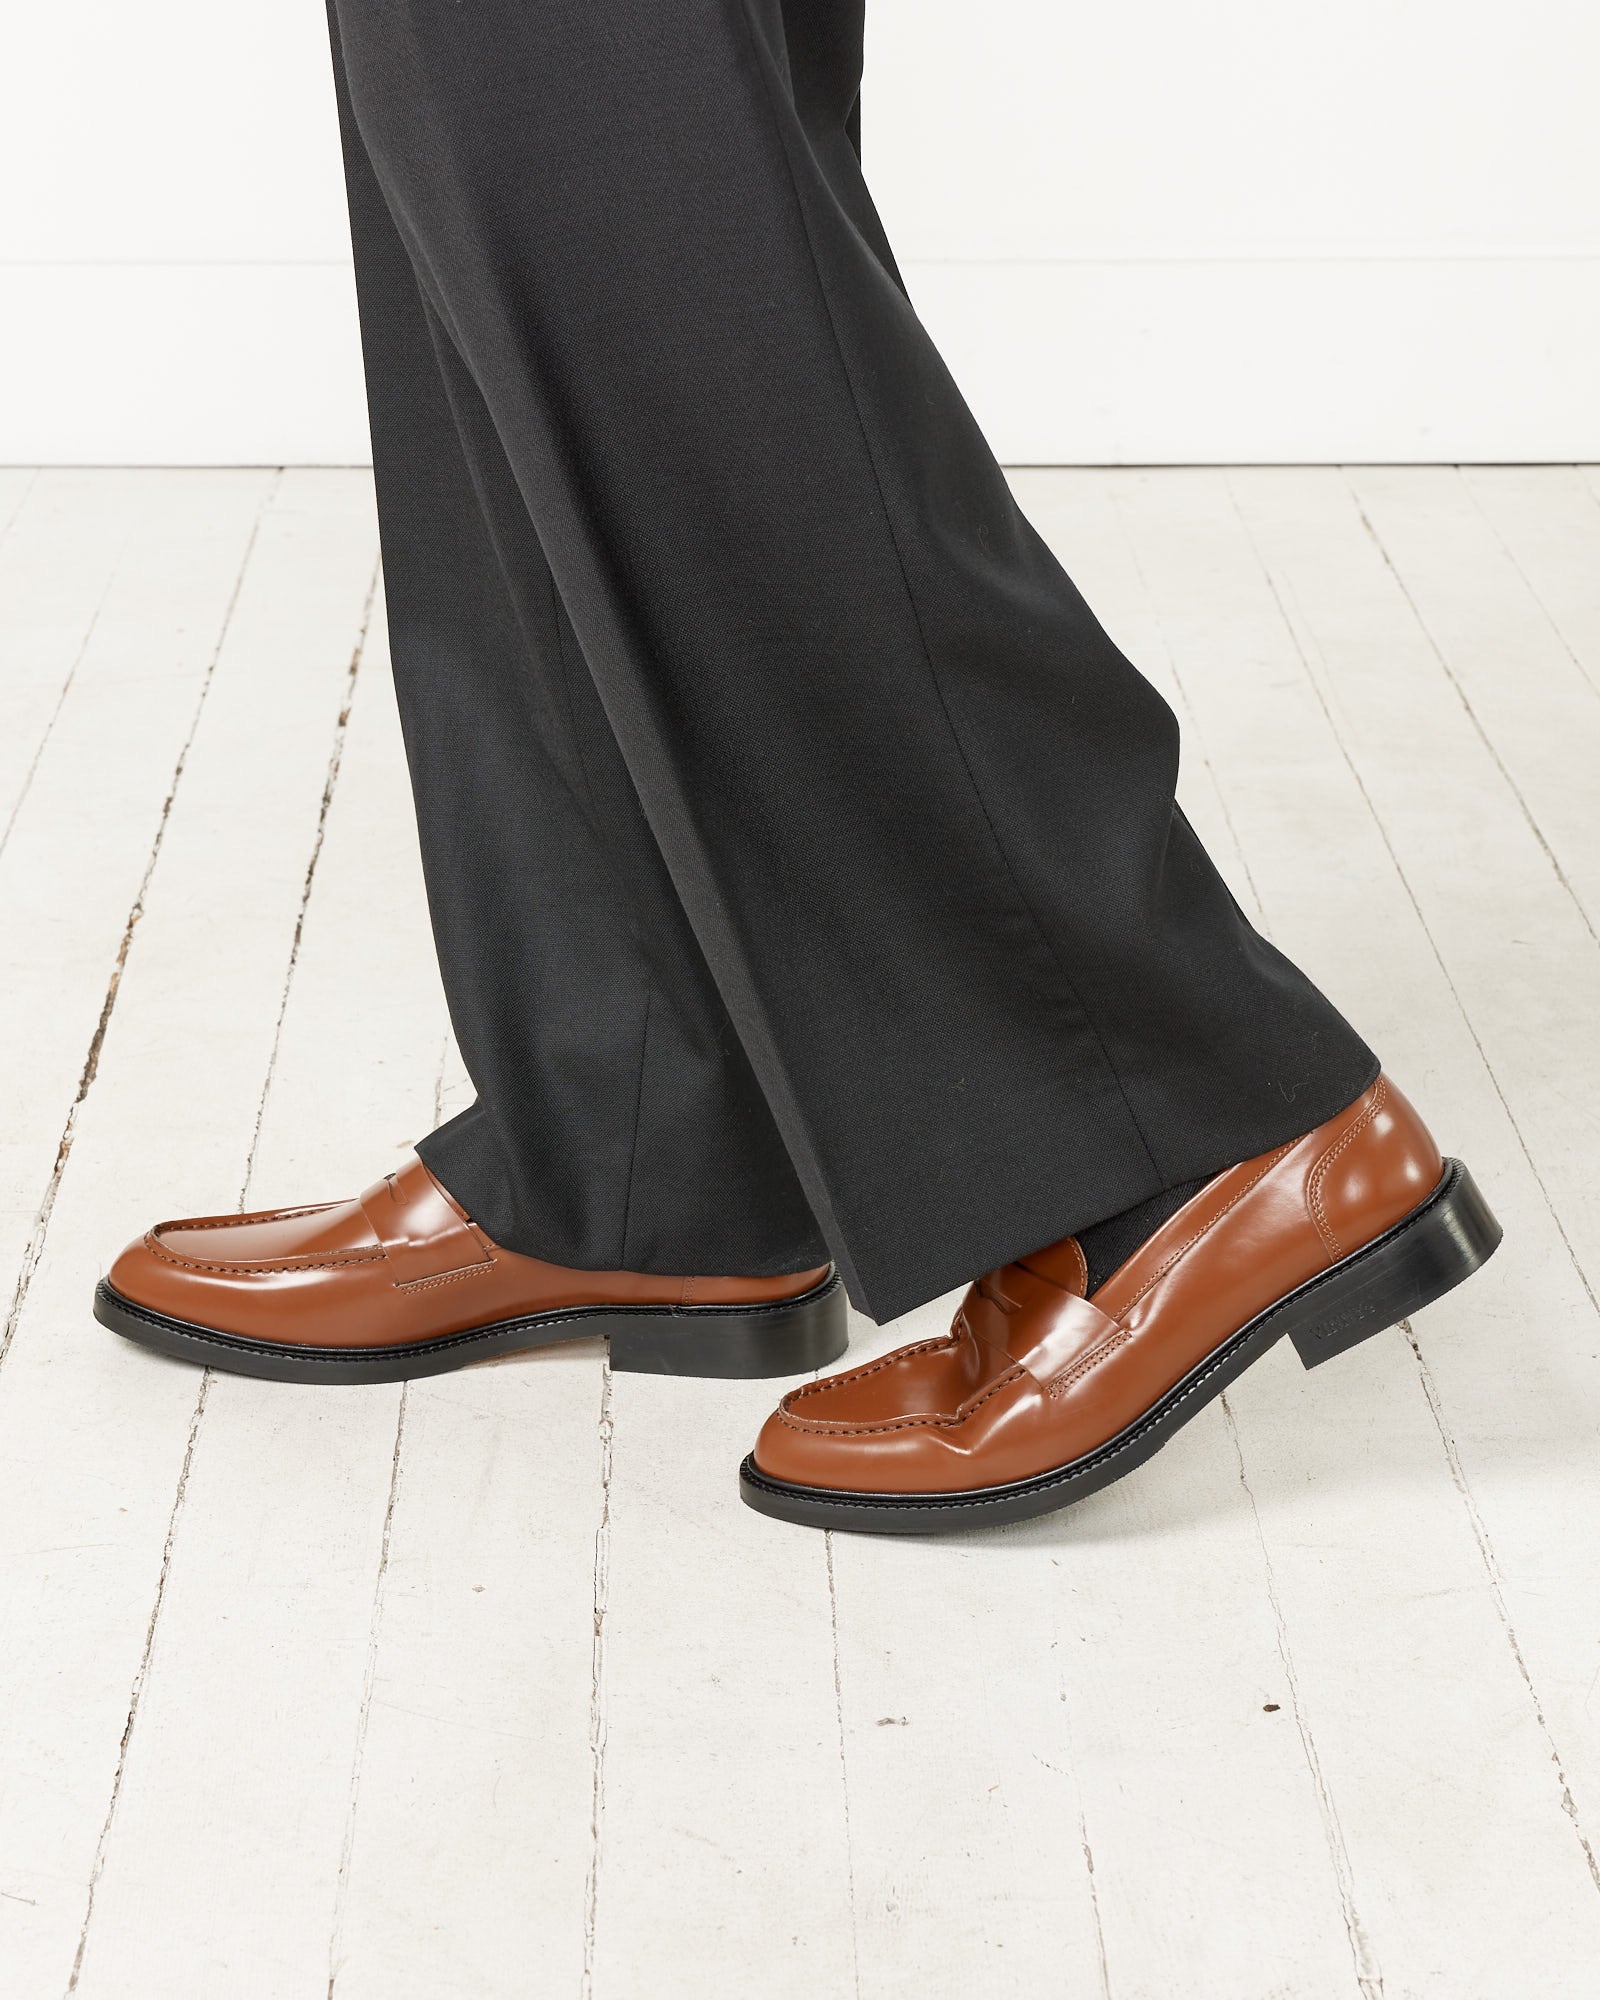 Townee Penny Loafer in Cognac